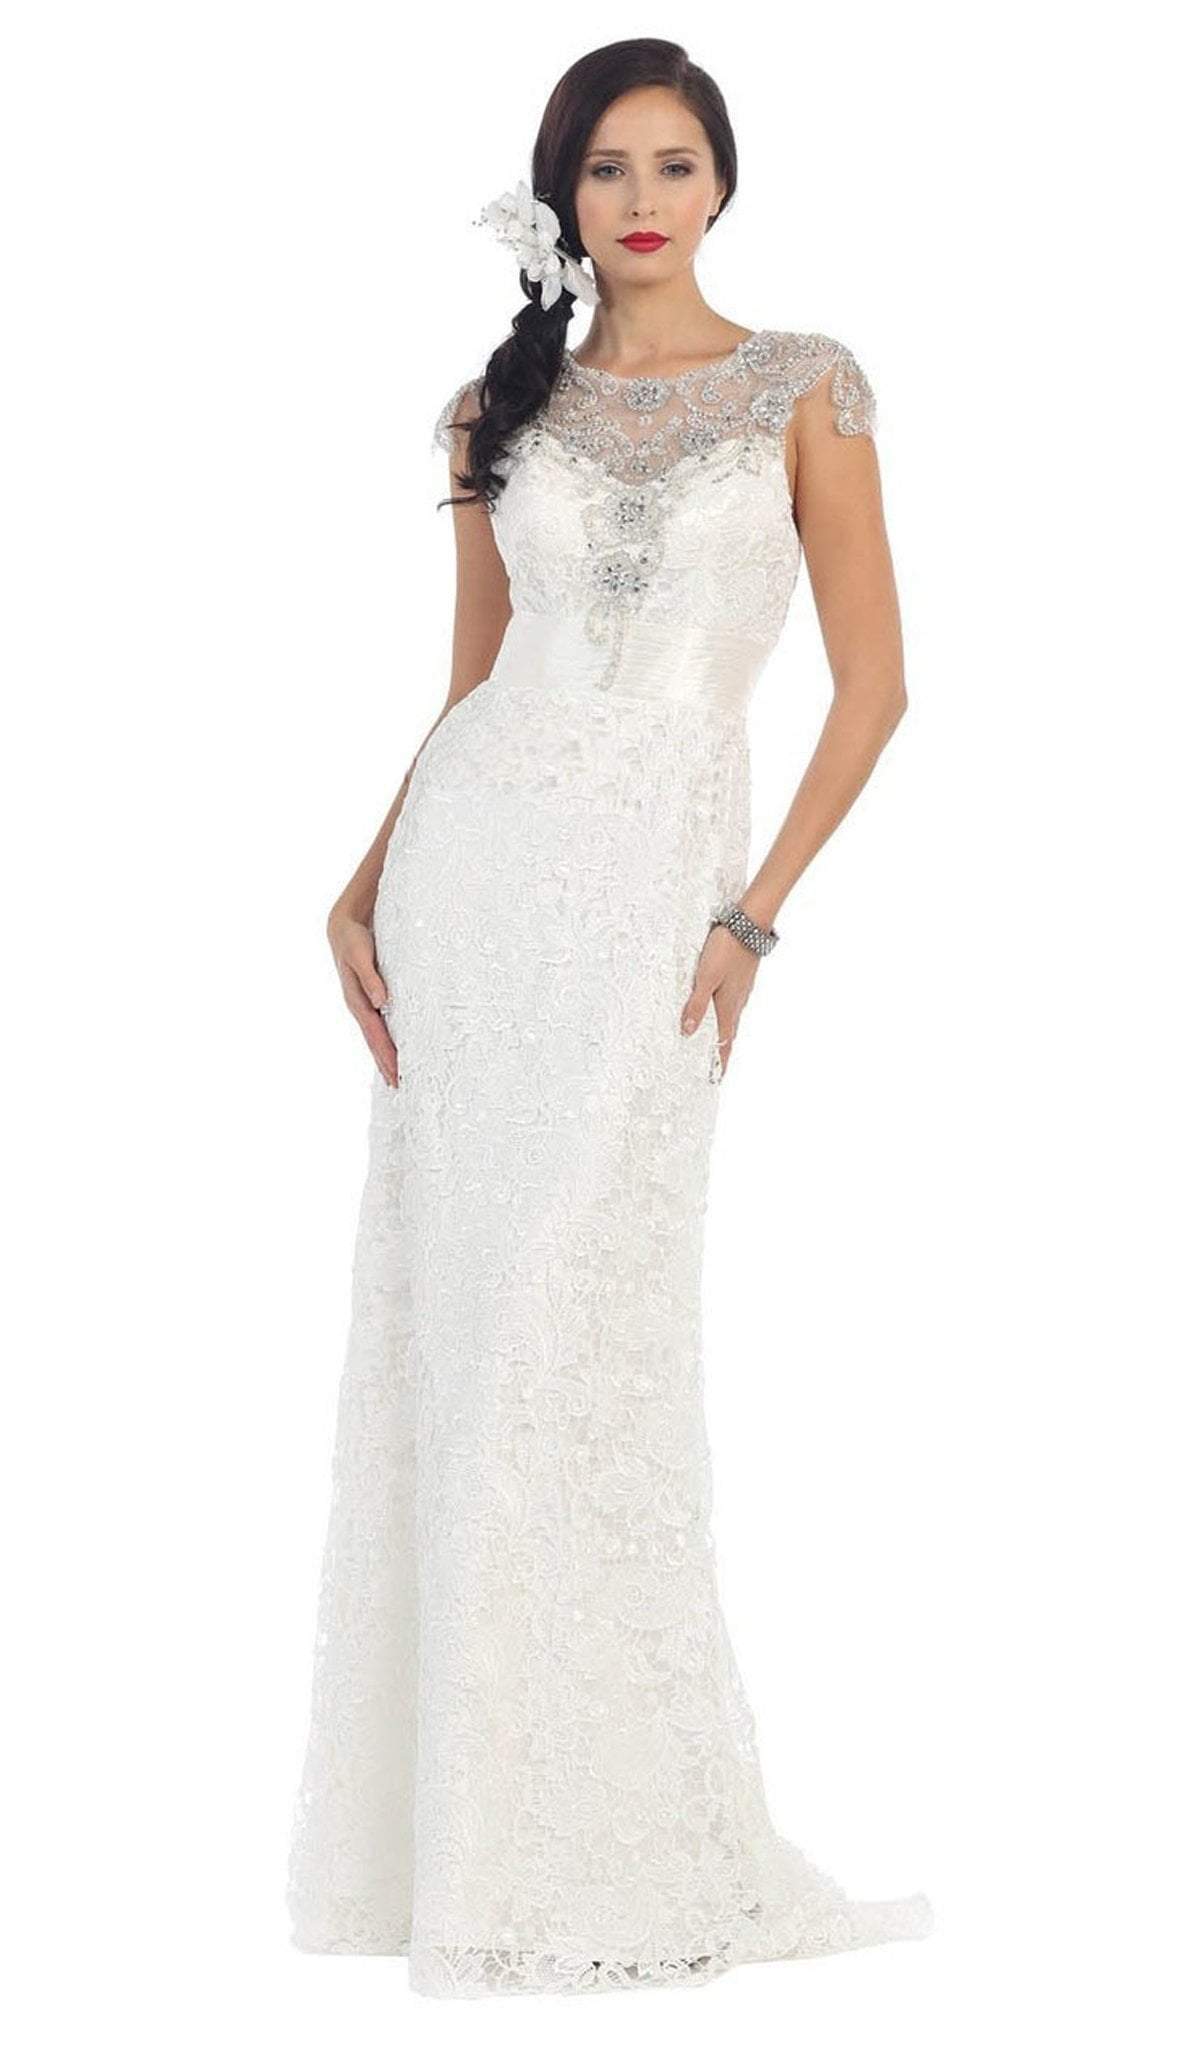 May Queen - RQ7182 Rhinestone Lace Floral Evening Gown Special Occasion Dress 6 / Ivory